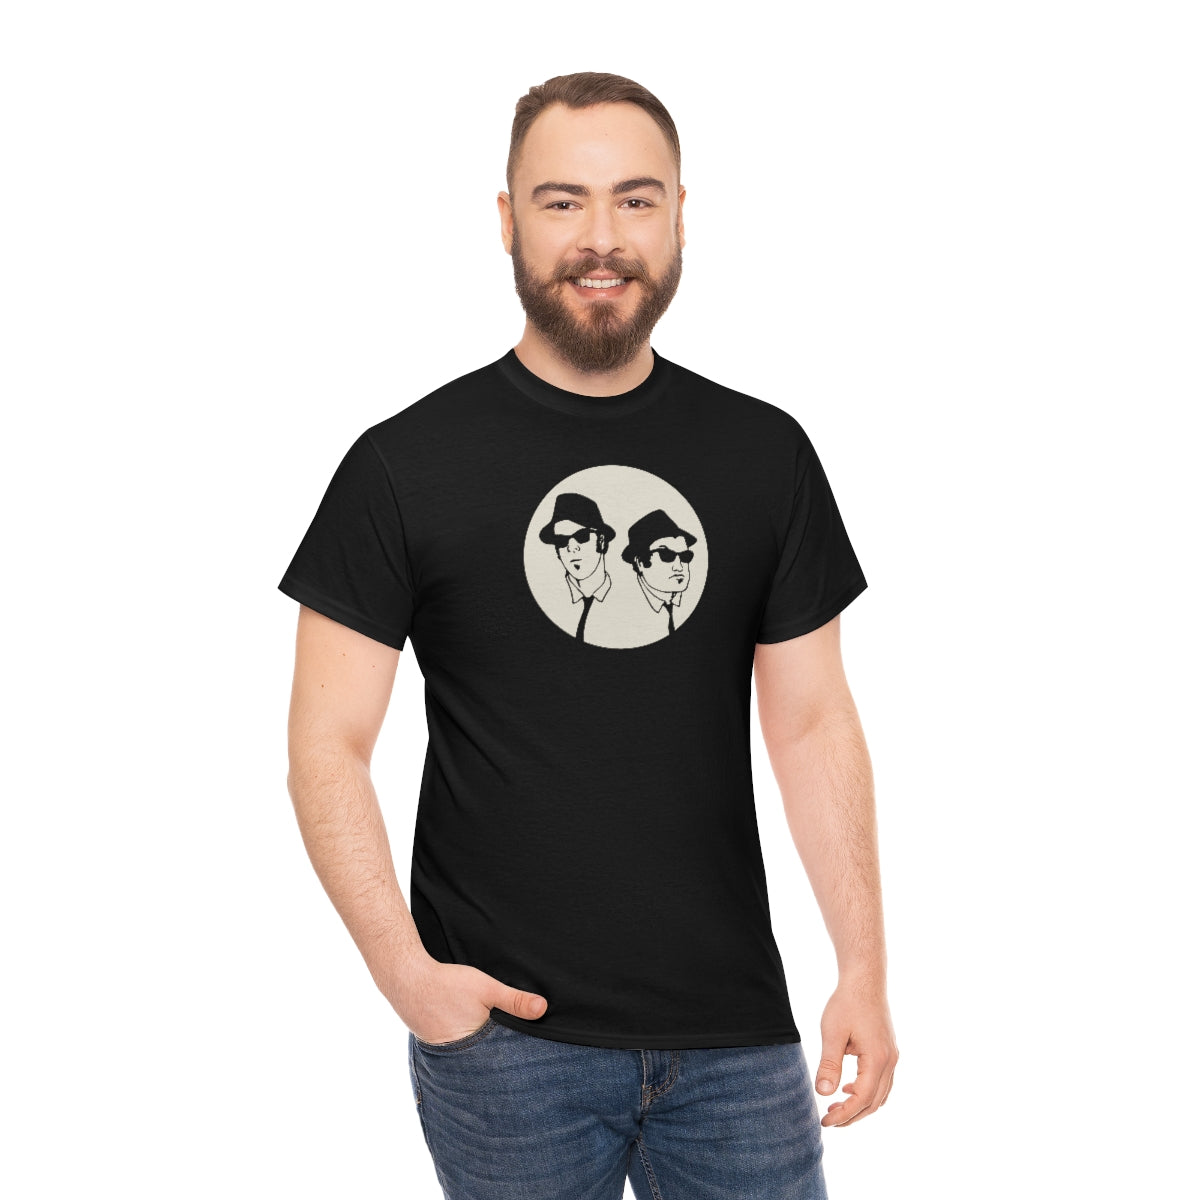 Blues Brothers T-Shirt